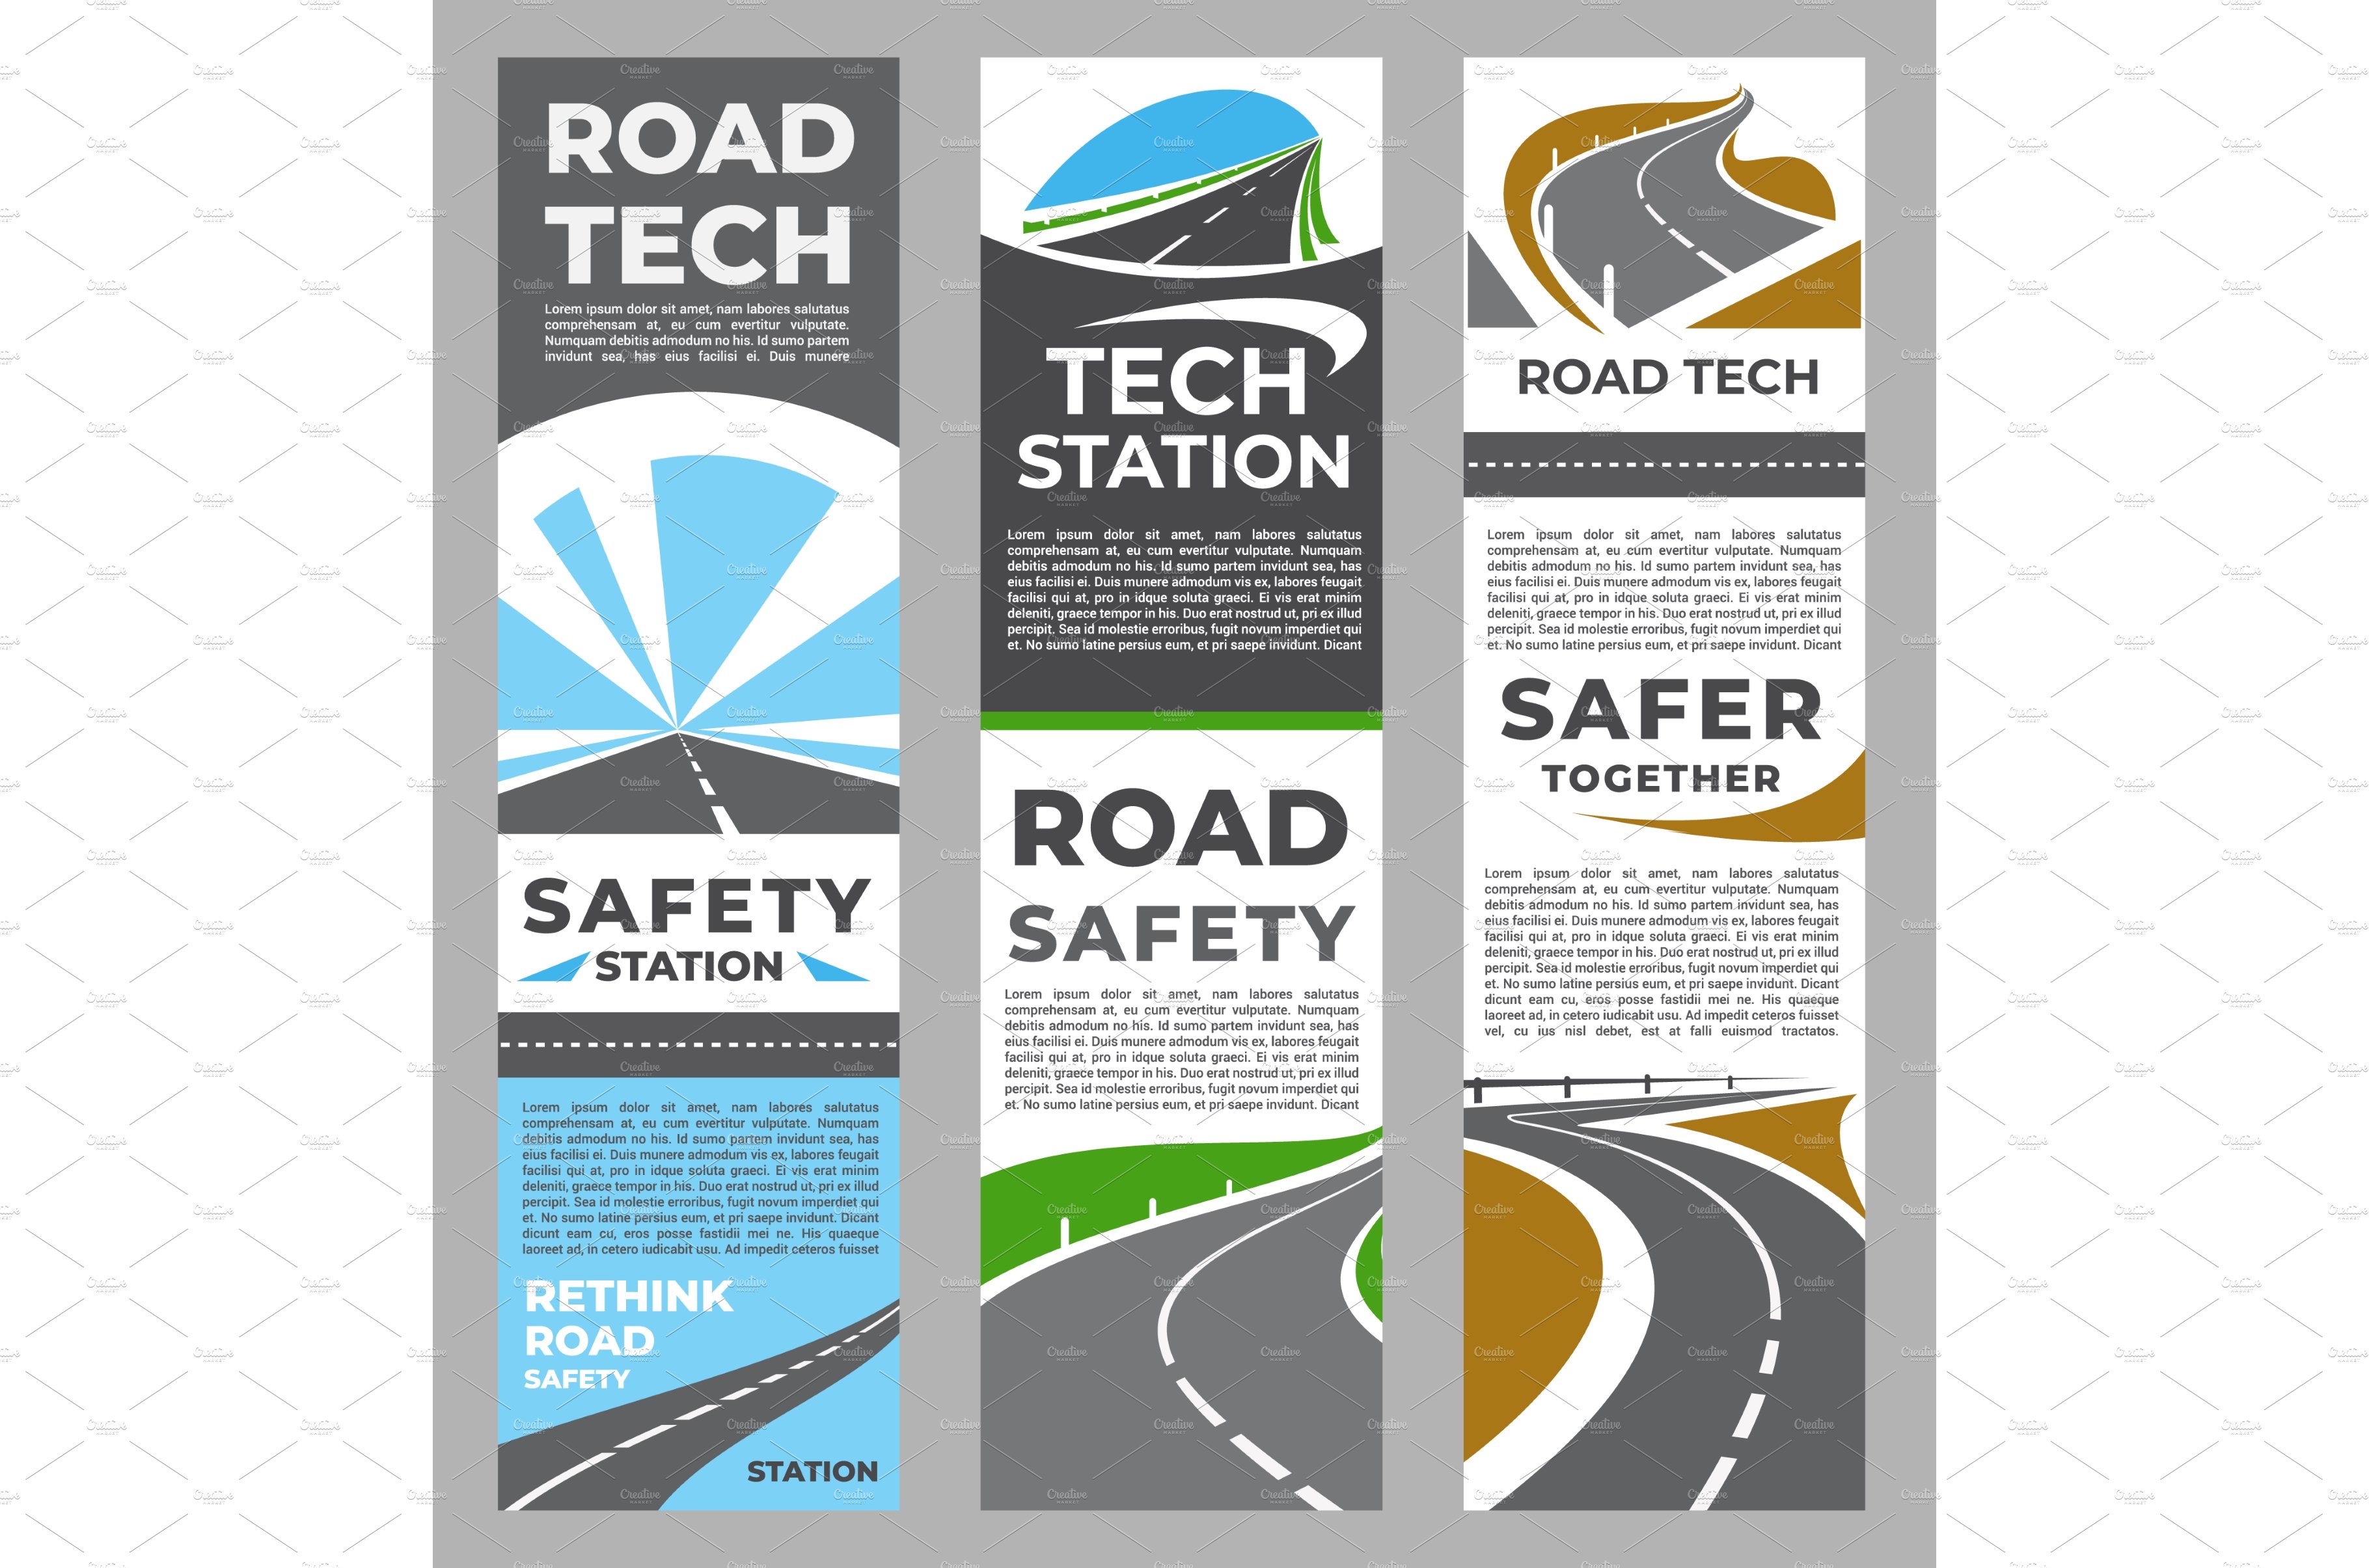 Road safety, highway tech industry cover image.